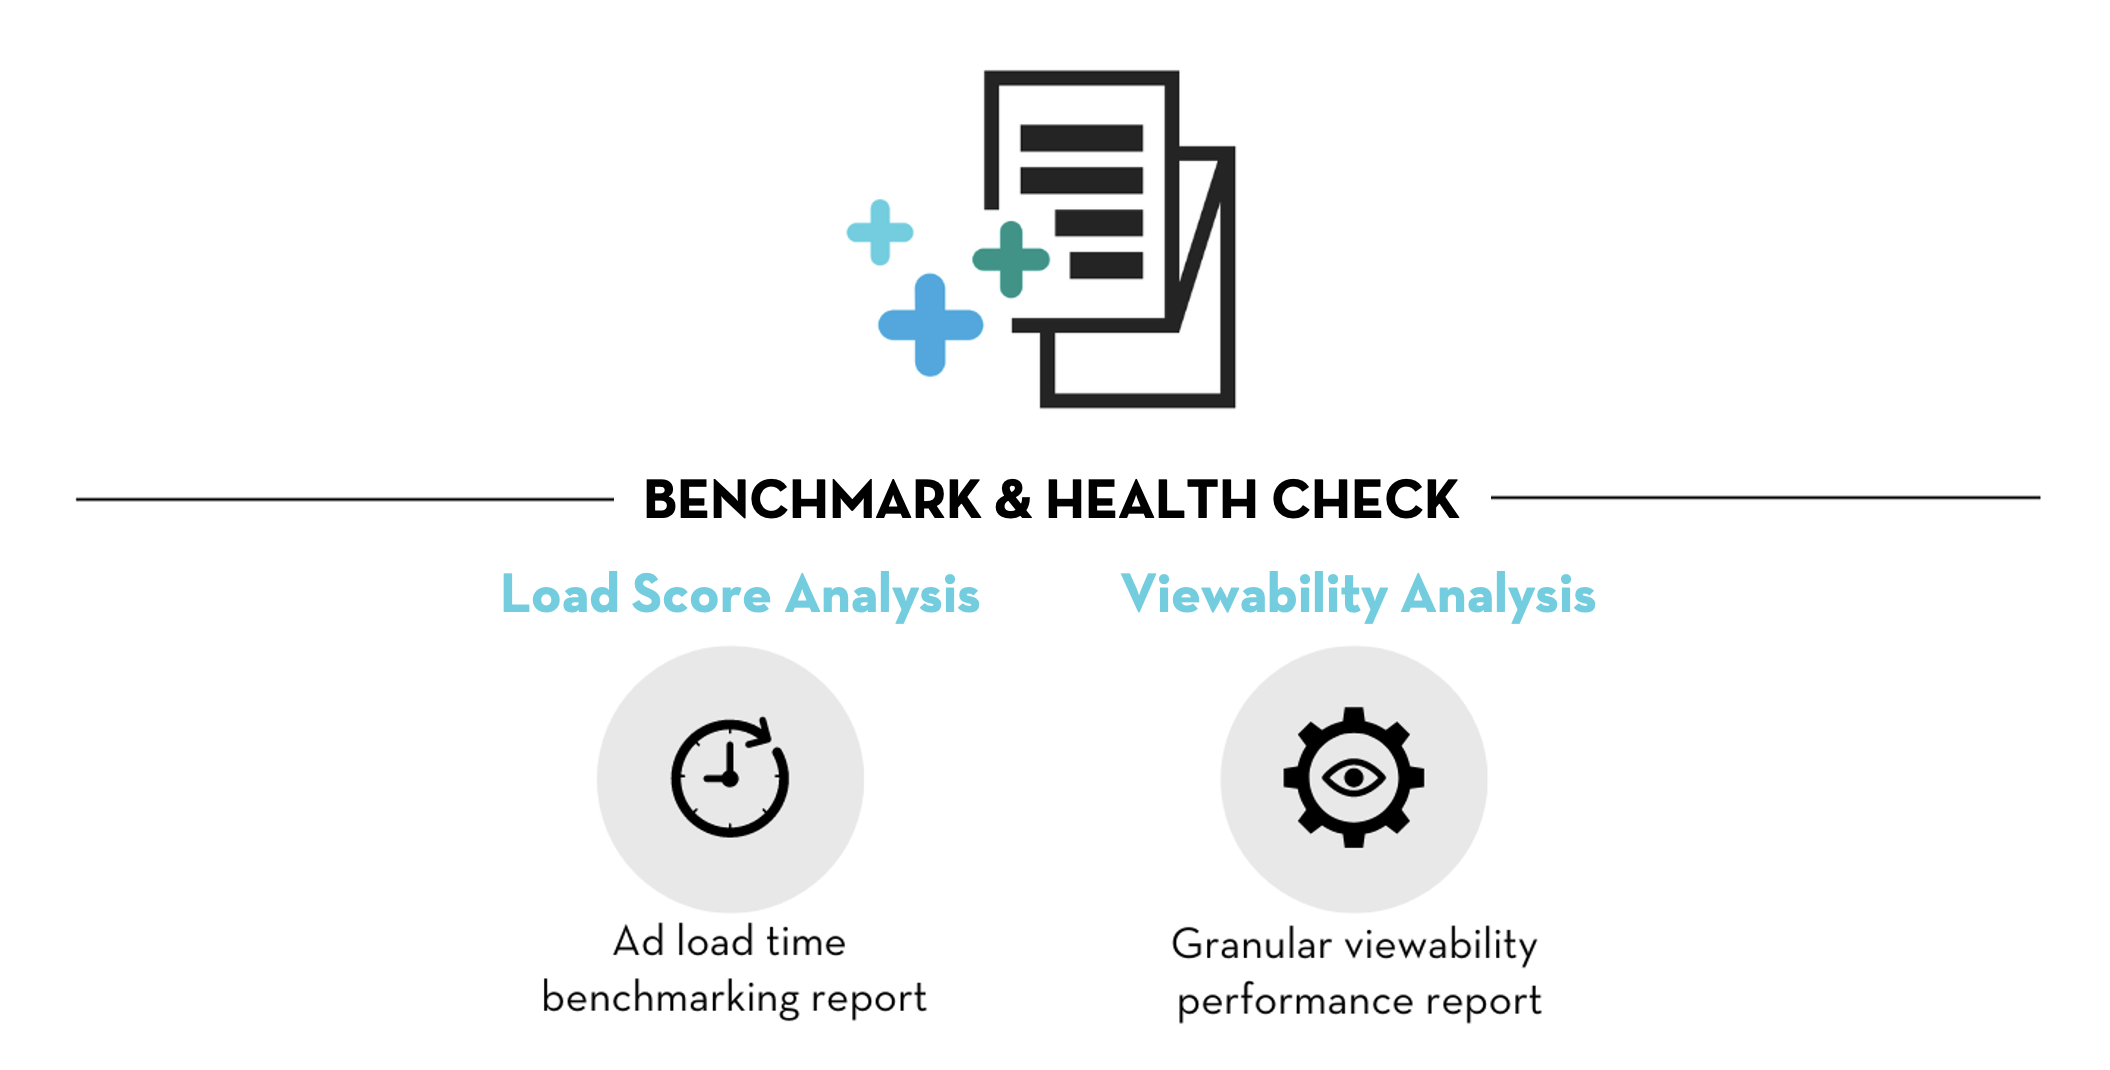 Benchmark & Health Check. 1. Load Score Analysis: Ad load time benchmarking report 2. Viewability Analysis: Granular viewability performance report.